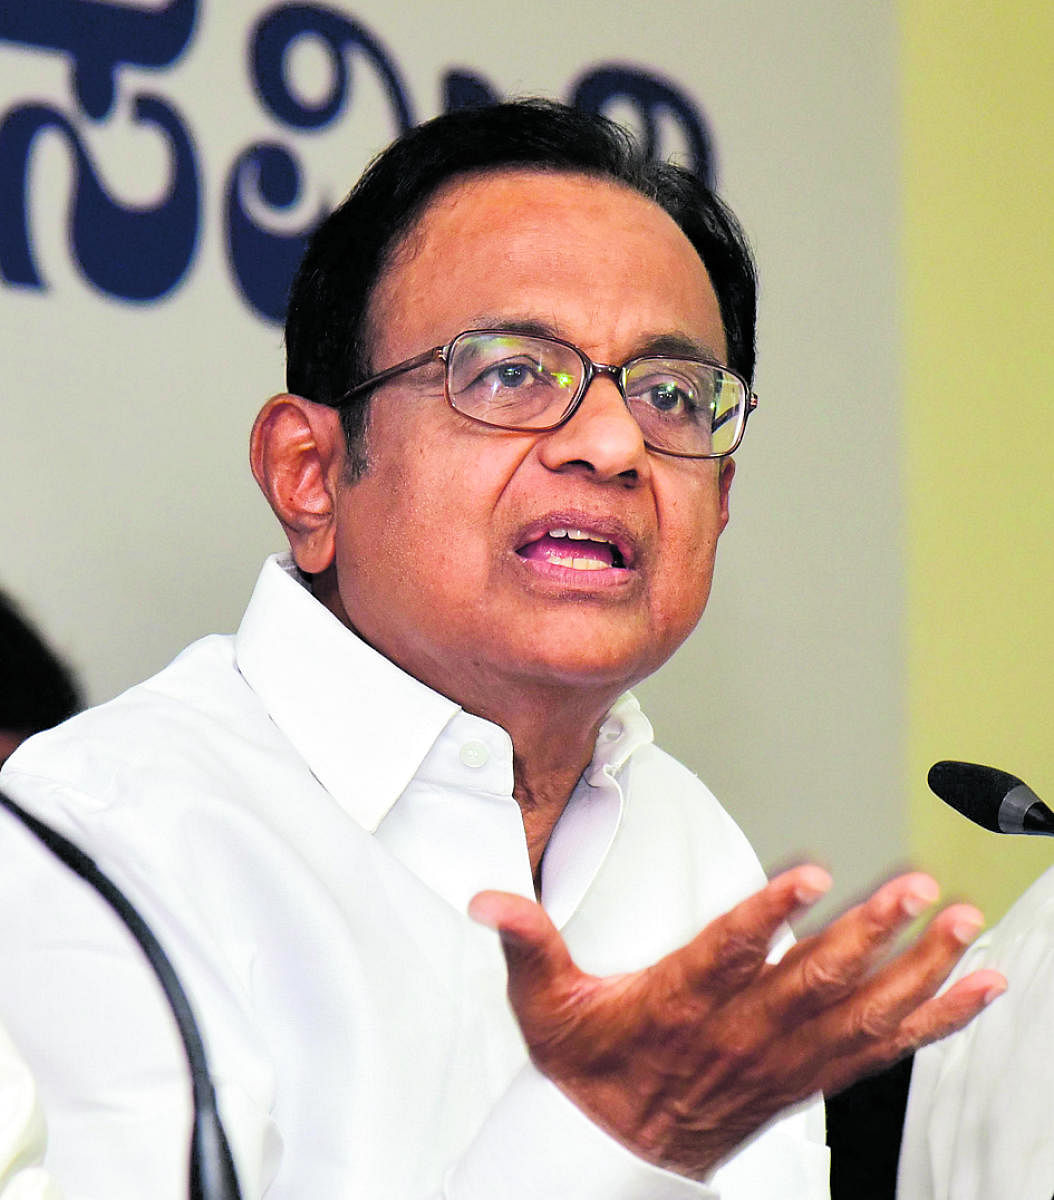 Former Union Finance Minister P Chidambaram seen during the Press Conference at KPCC Office, in Bengaluru on Tuesday 8th May 2018. Photo/ B H Shivakumar